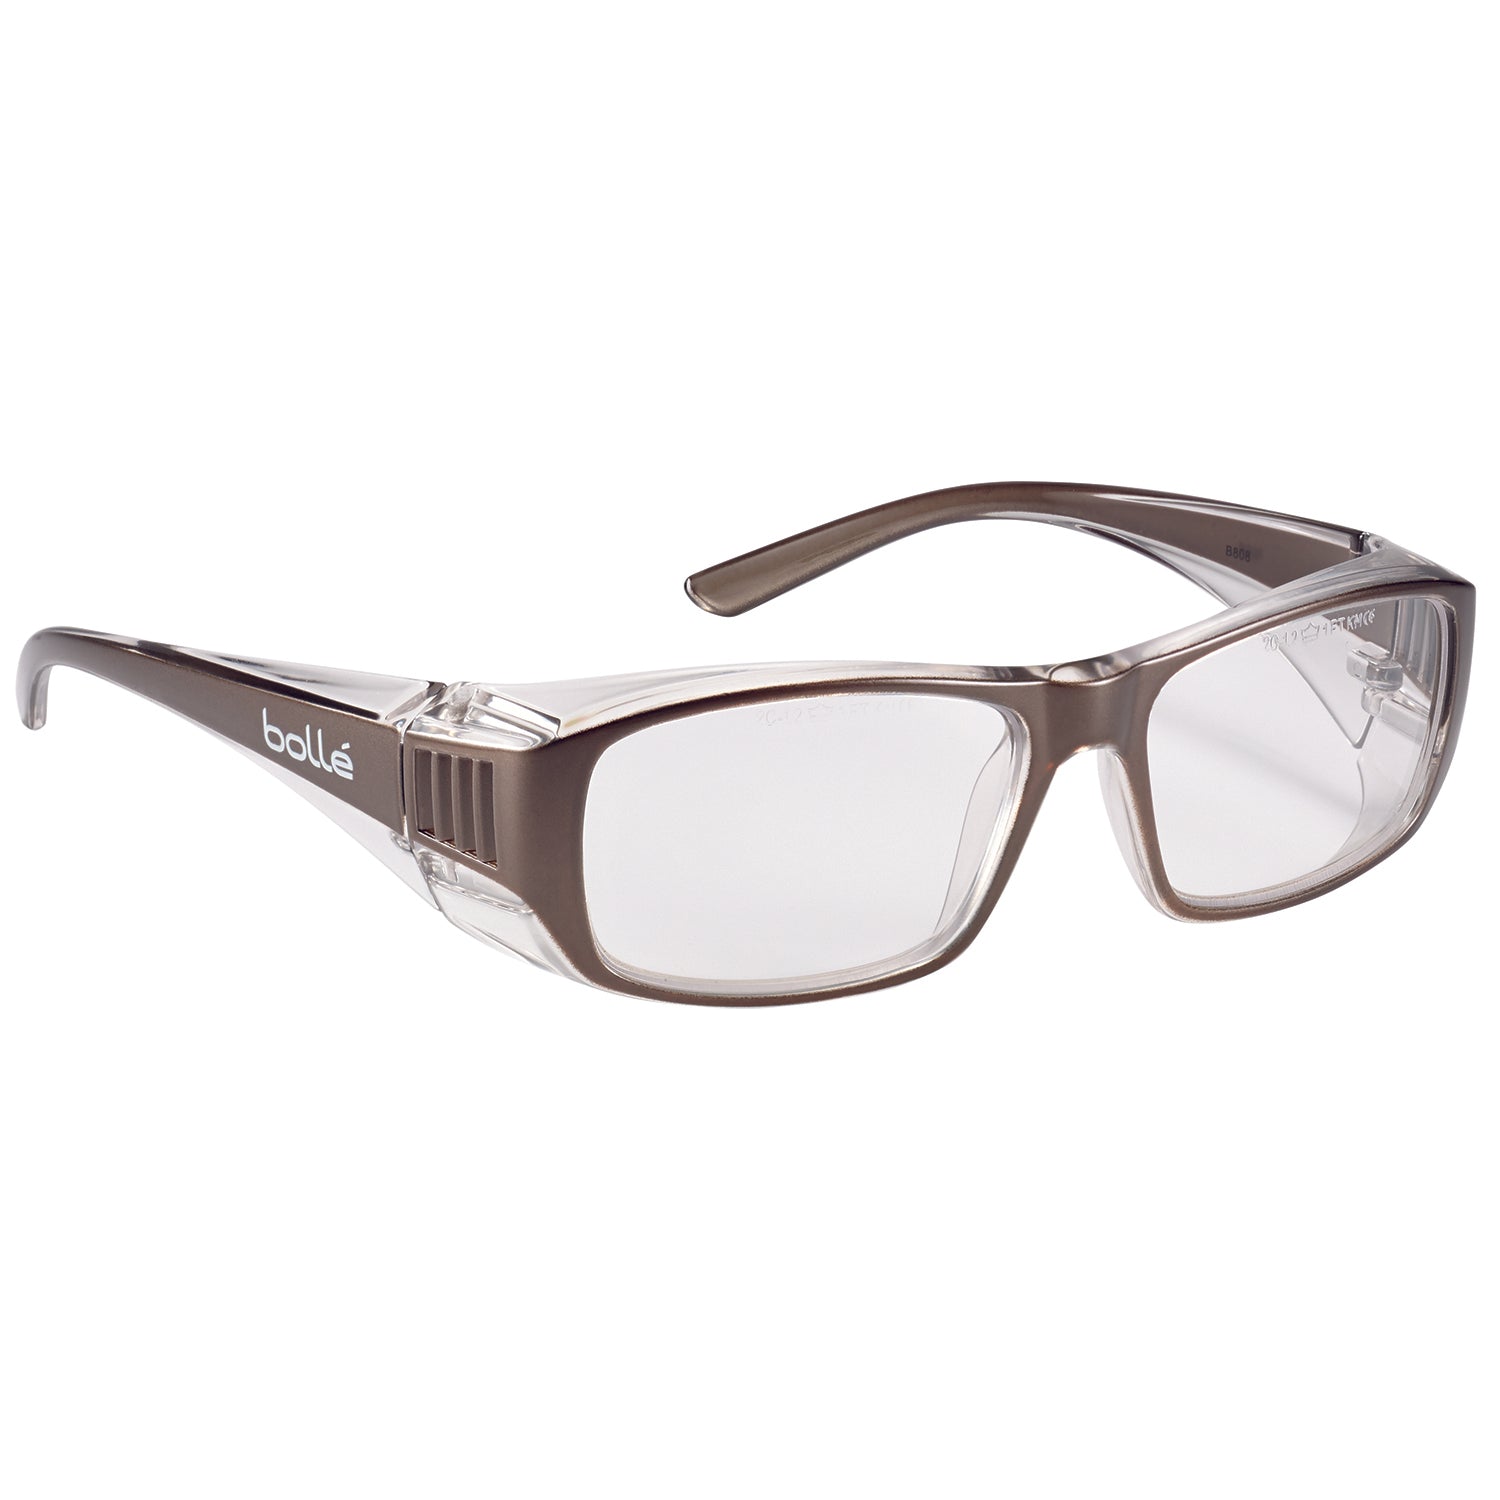 Bolle B808 safety glasses clear lens